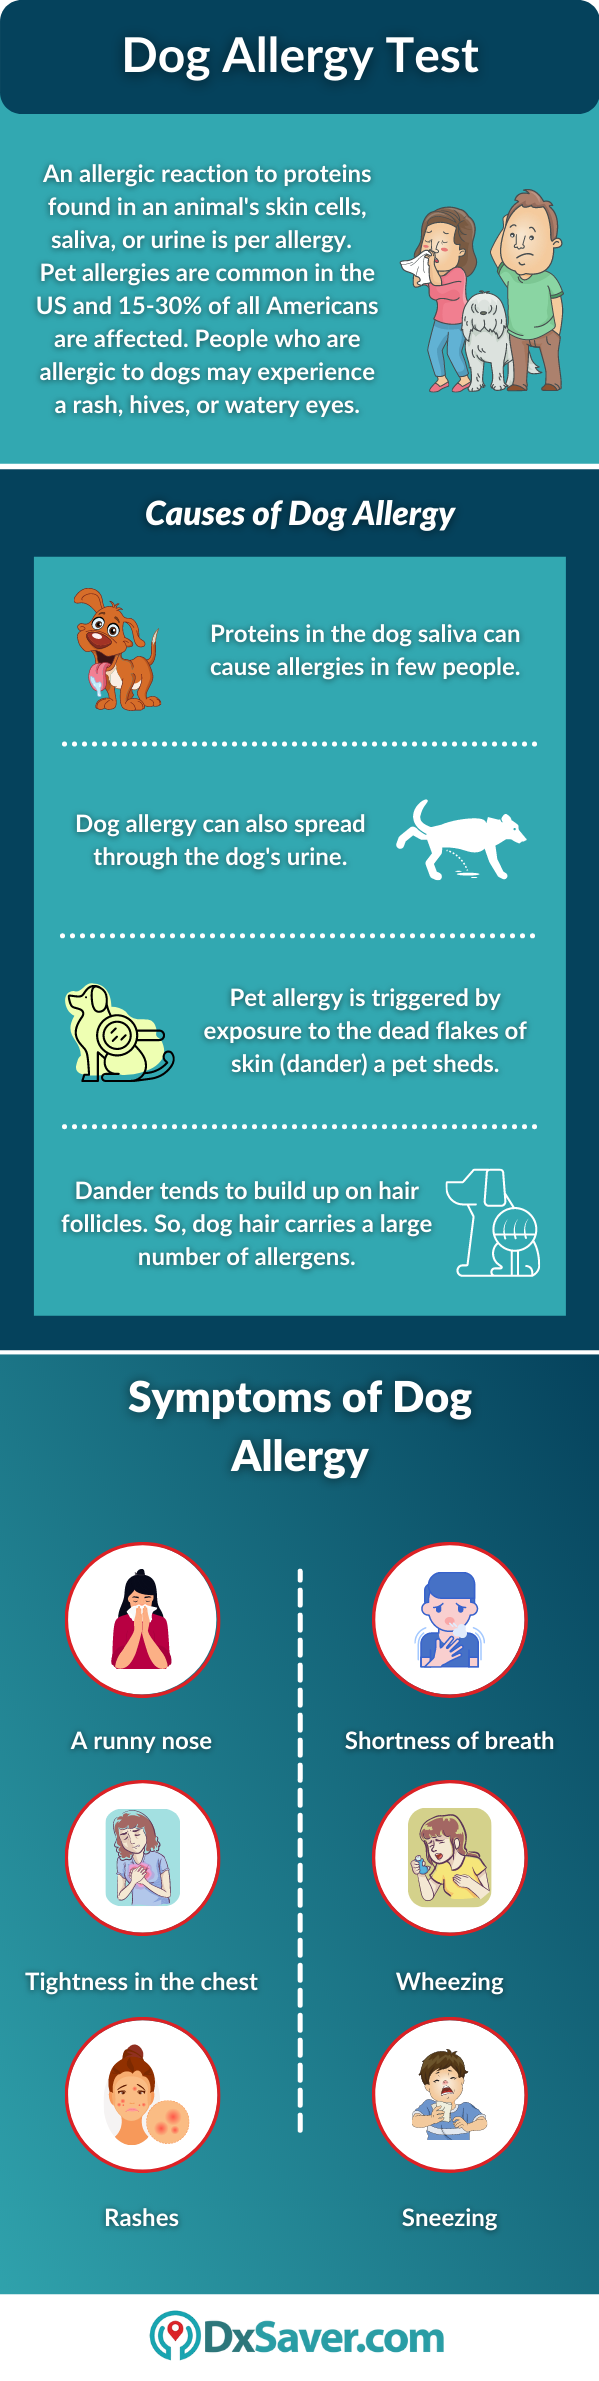 Dog Allergy: Causes and Symptoms